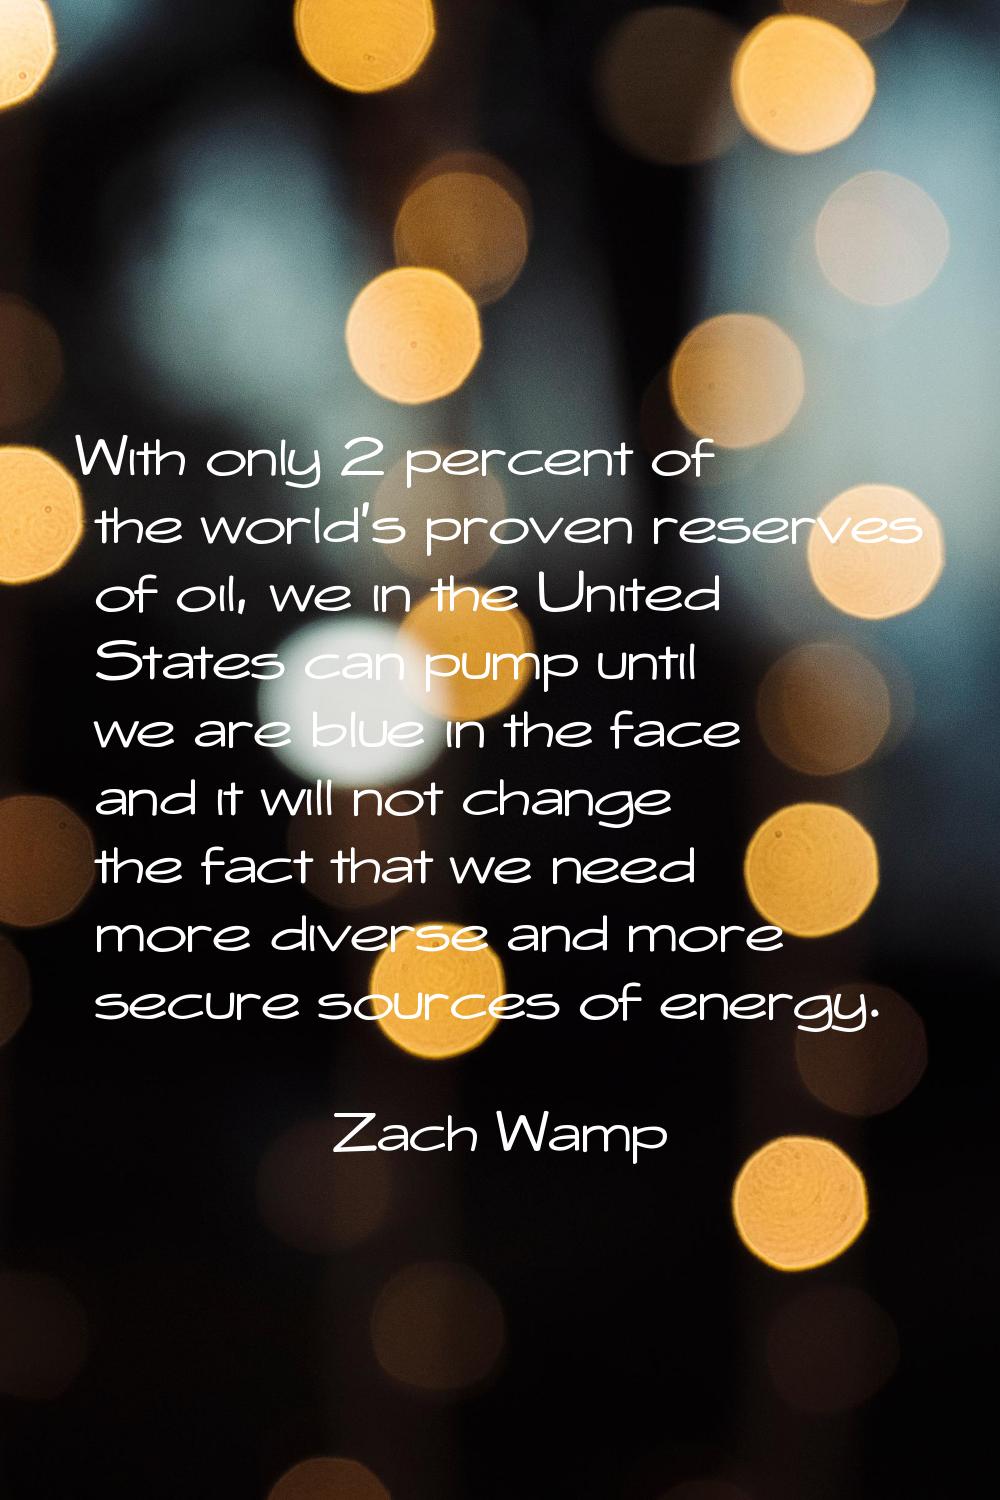 With only 2 percent of the world's proven reserves of oil, we in the United States can pump until w